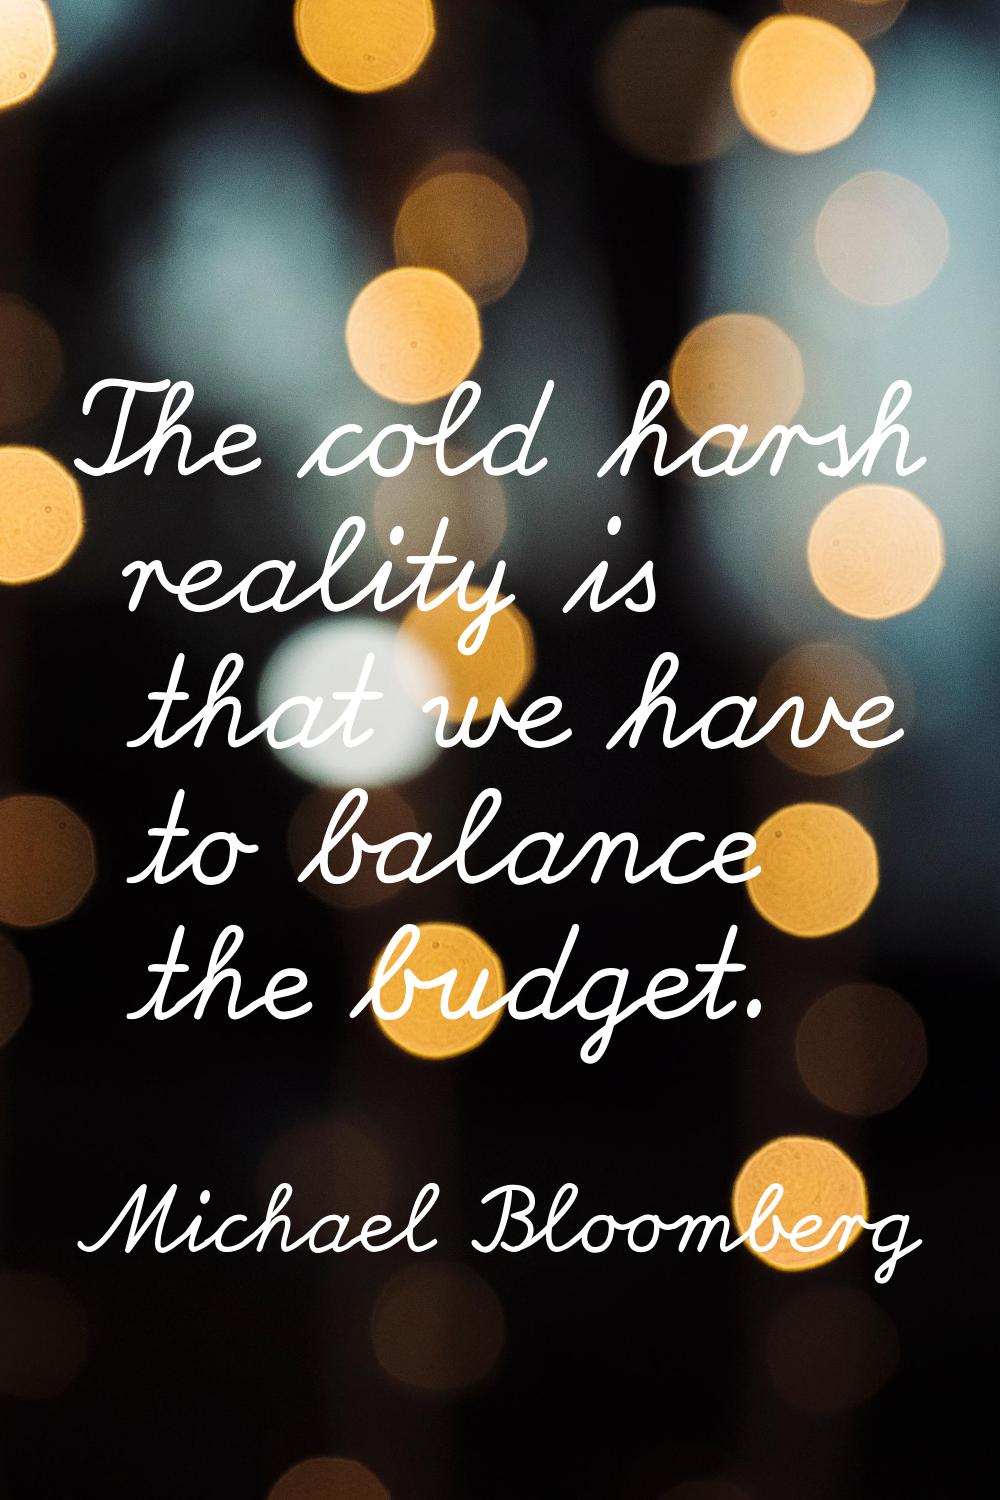 The cold harsh reality is that we have to balance the budget.